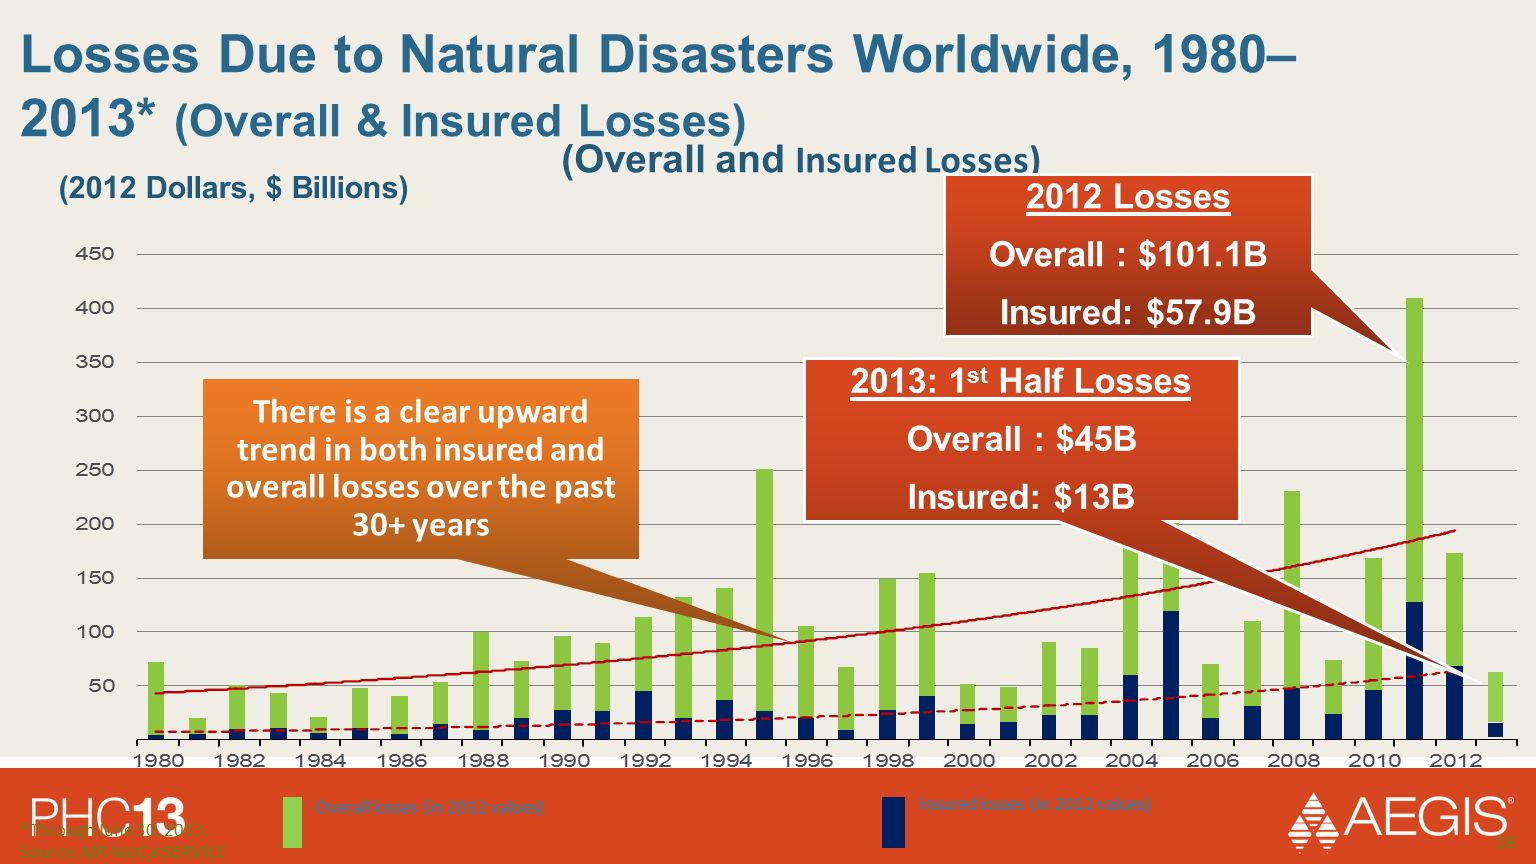 Losses Due to Natural Disasters Worldwide, 1980– 2013* (Overall & Insured Losses) 18 Overall losses (in 2012 values) Insured losses (in 2012 values) *Through June 30, 2013.